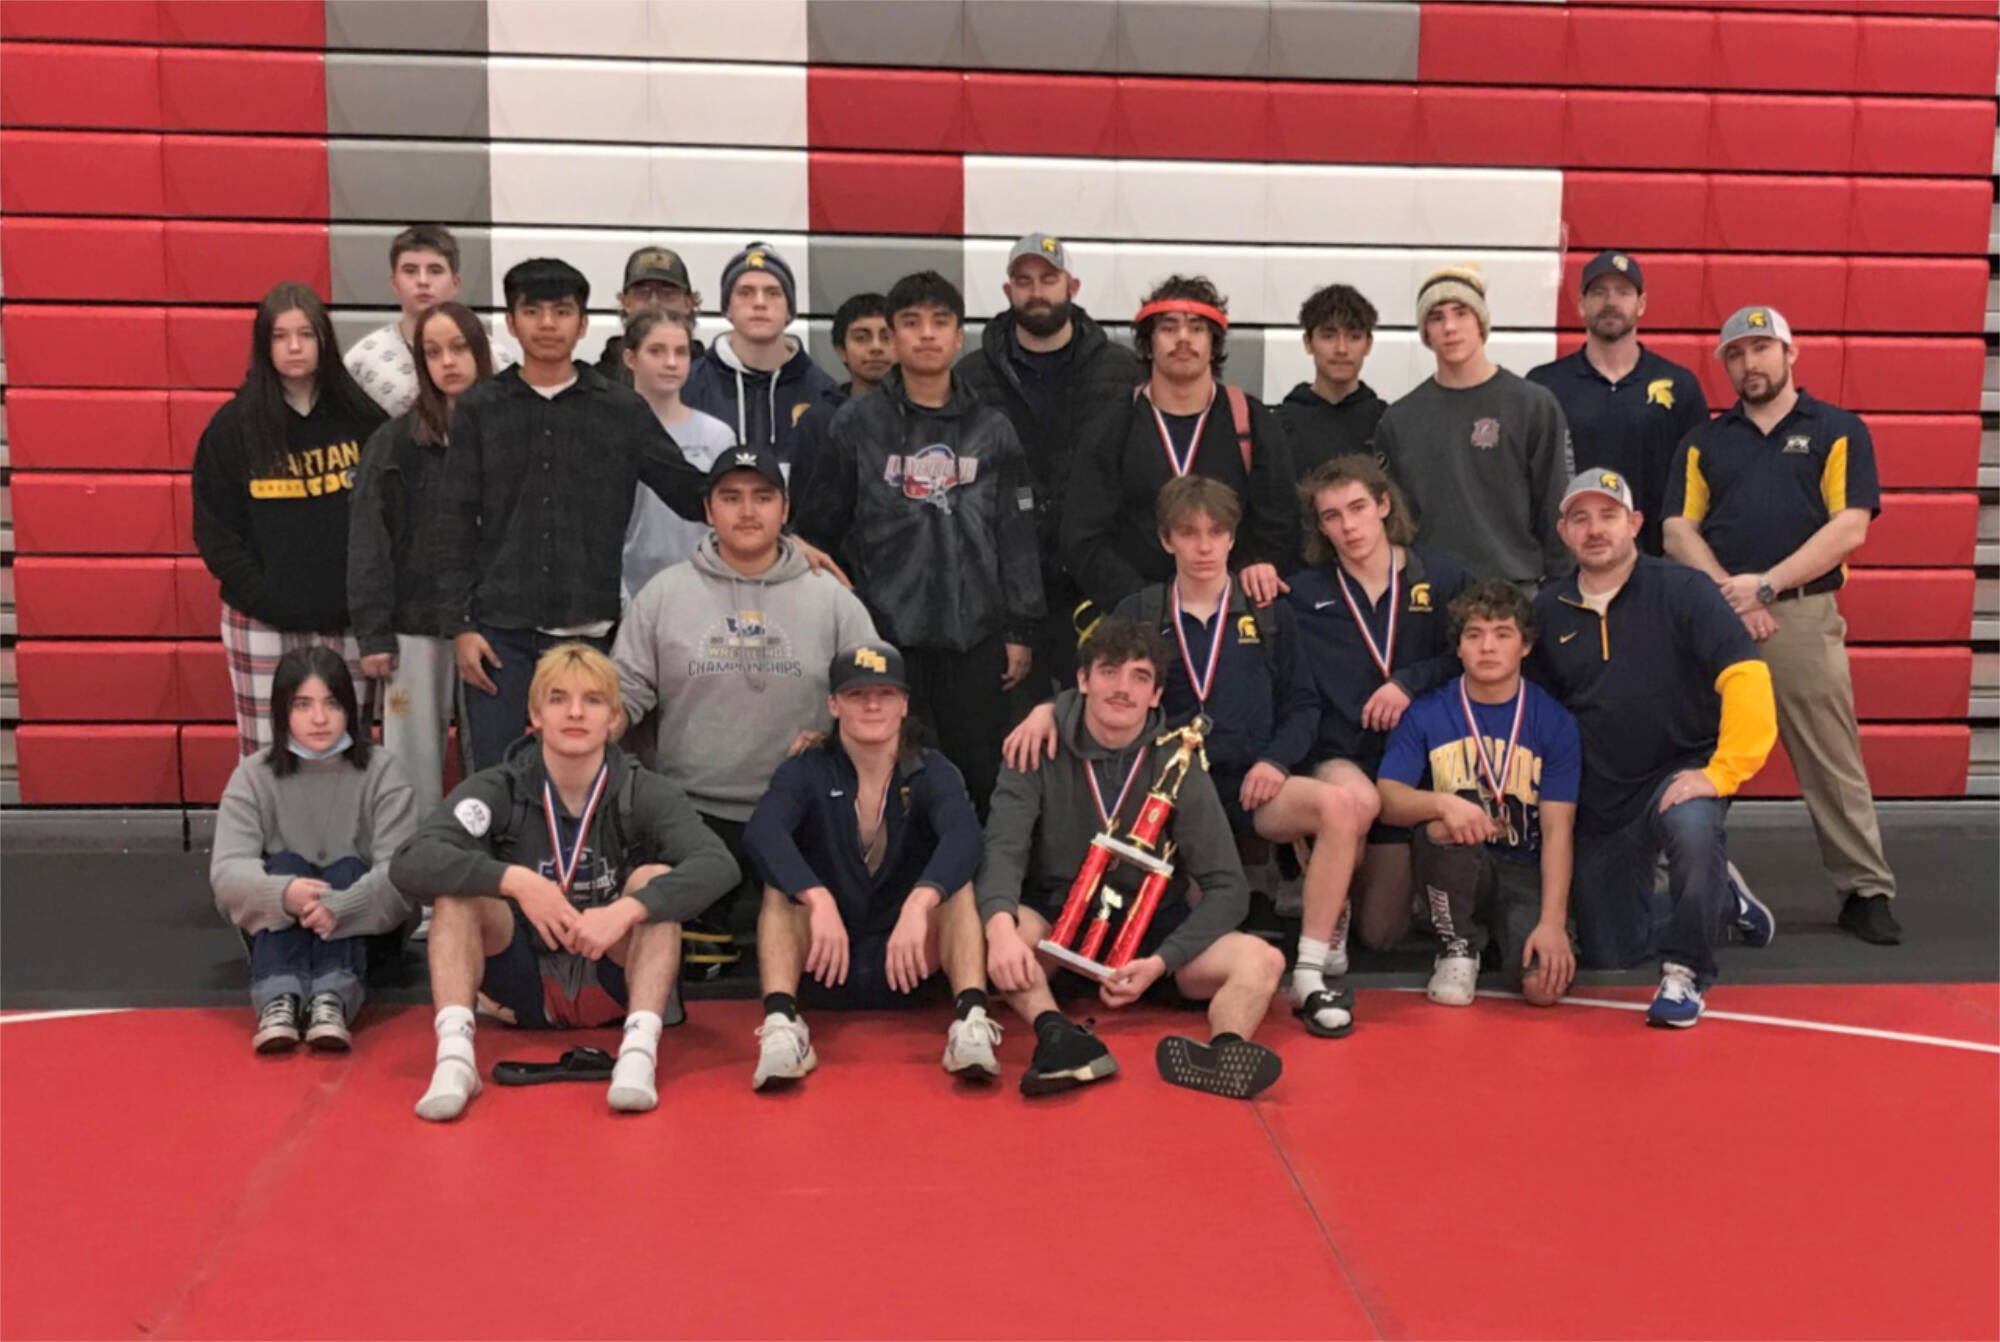 Courtesy of Forks High School
The Forks boys and girls wrestling teams celebrate their second- and fourth-place team finishes at the Tony Saldiver Invitational held in Granger this weekend.